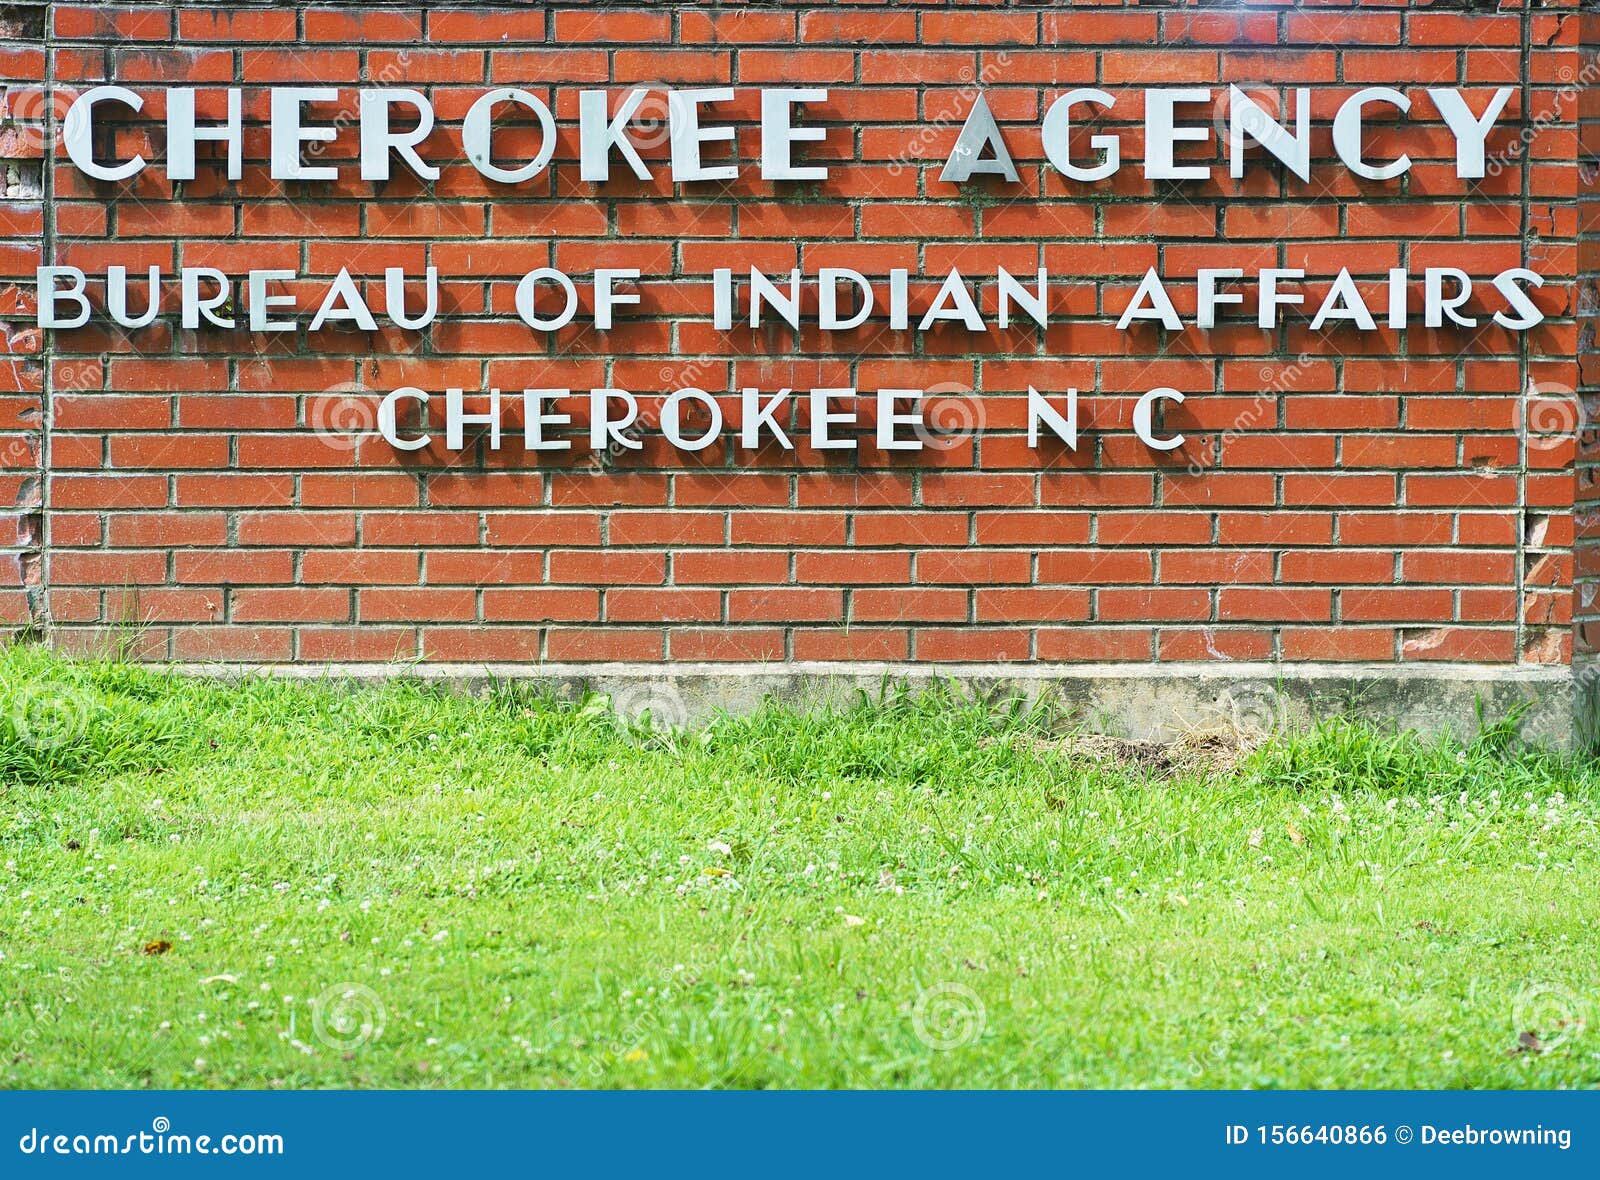 cherokee nation tag office late fees